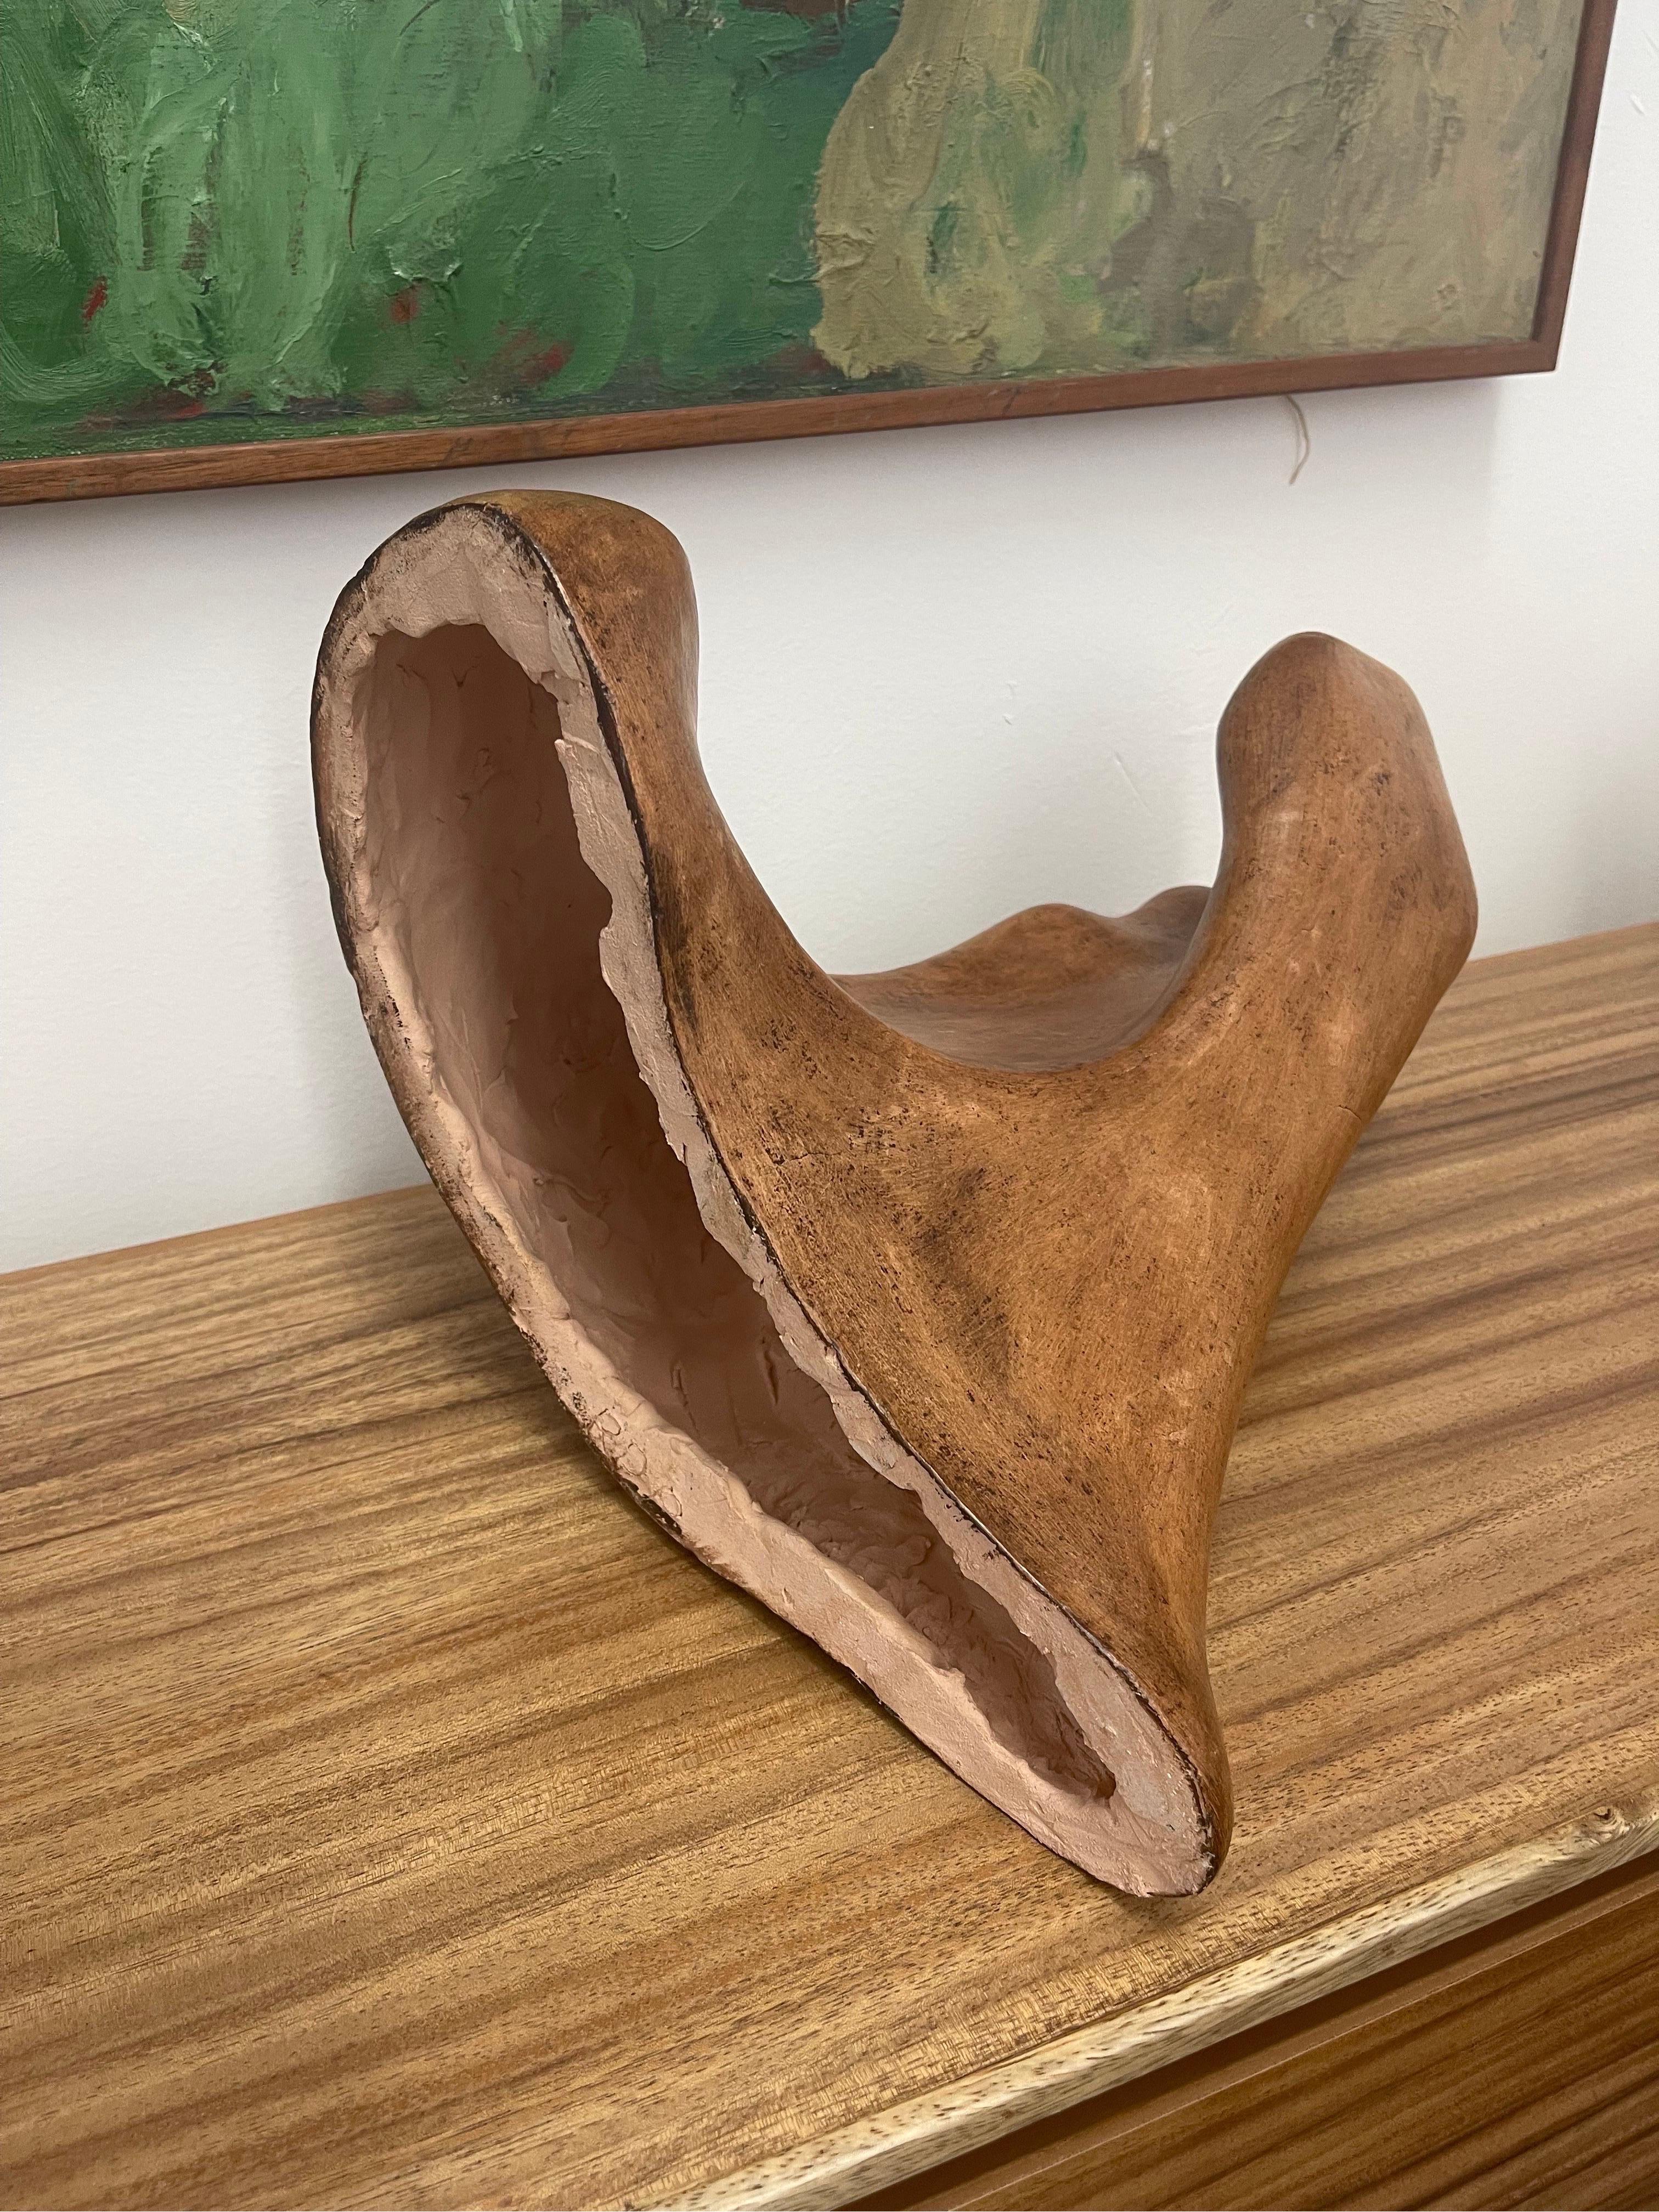 Vintage Biomorphic Clay Signed Sculpture by Washington Artist Ruth, circa 1970s For Sale 2